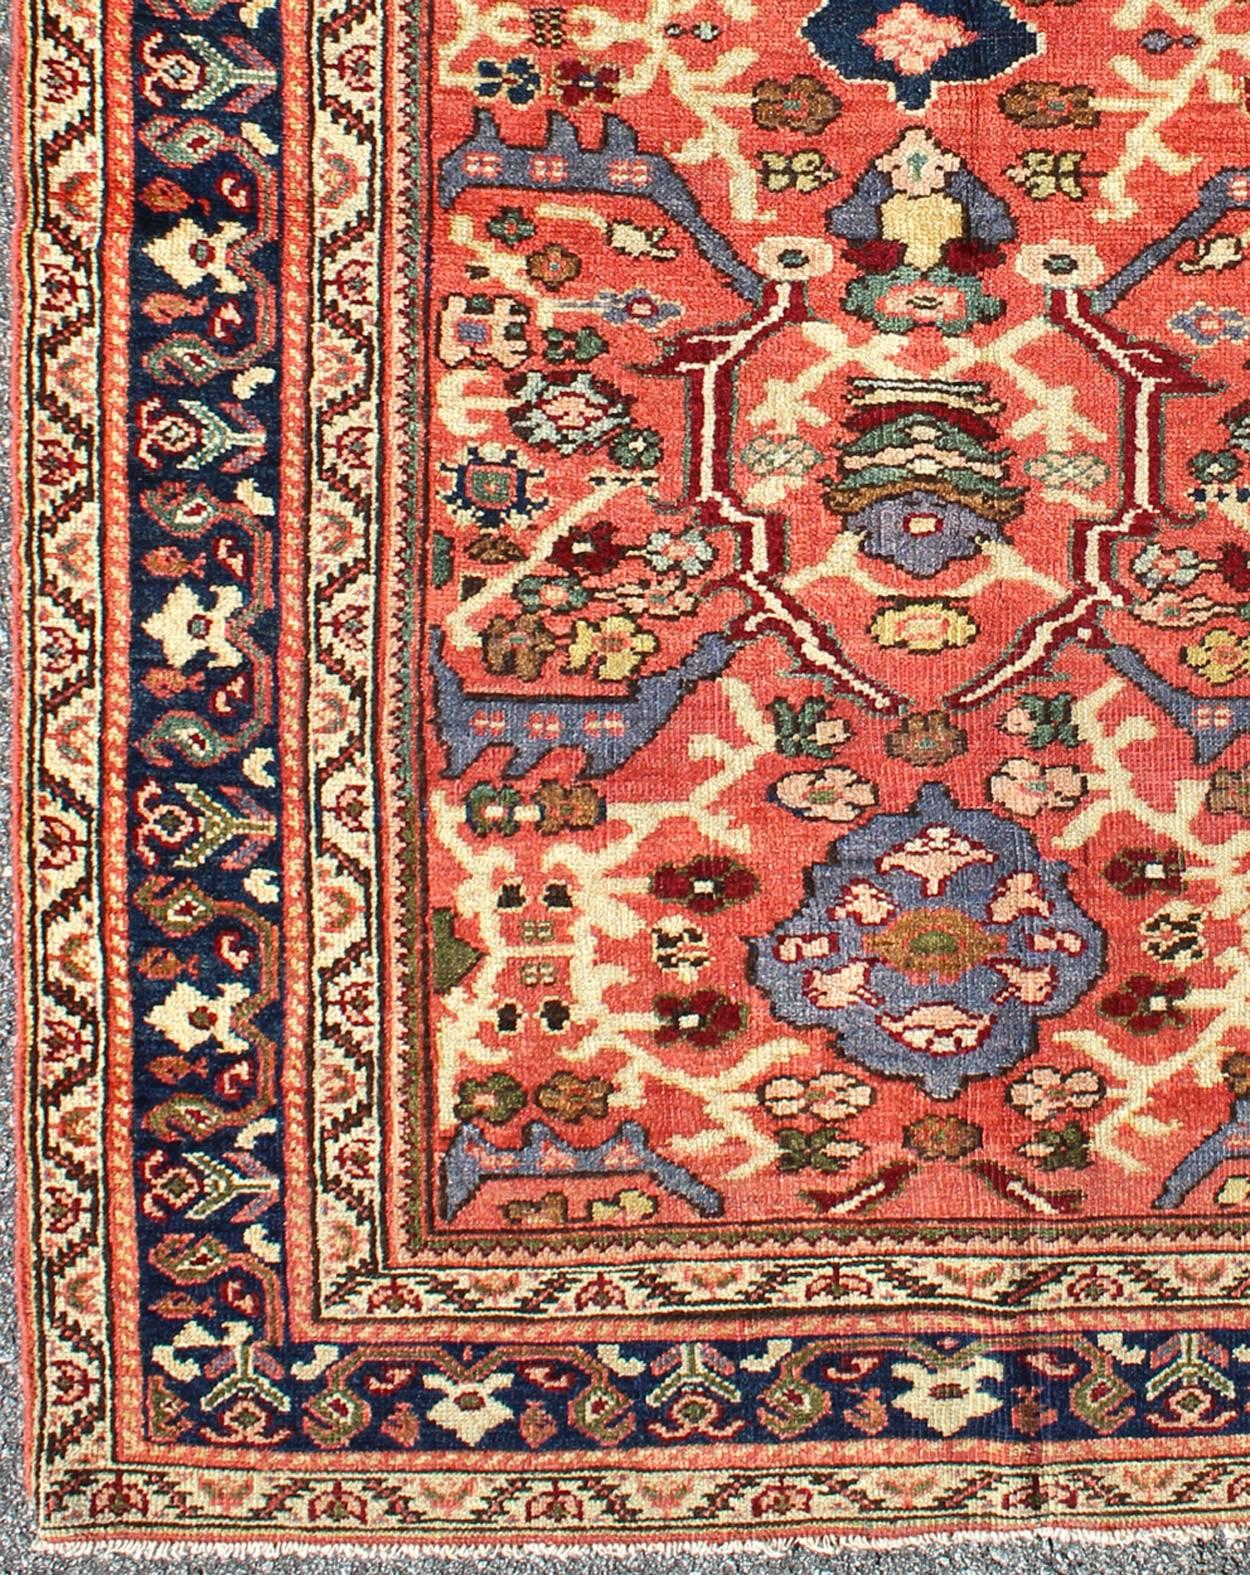 A beautiful Sultanabad rug, this piece features a cinnamon-shaded field bearing an intricate floral motif of repeating red, light purple and pink flowers. A thin blue border displays straight rows of single blossoms, interspersed with ruyi or